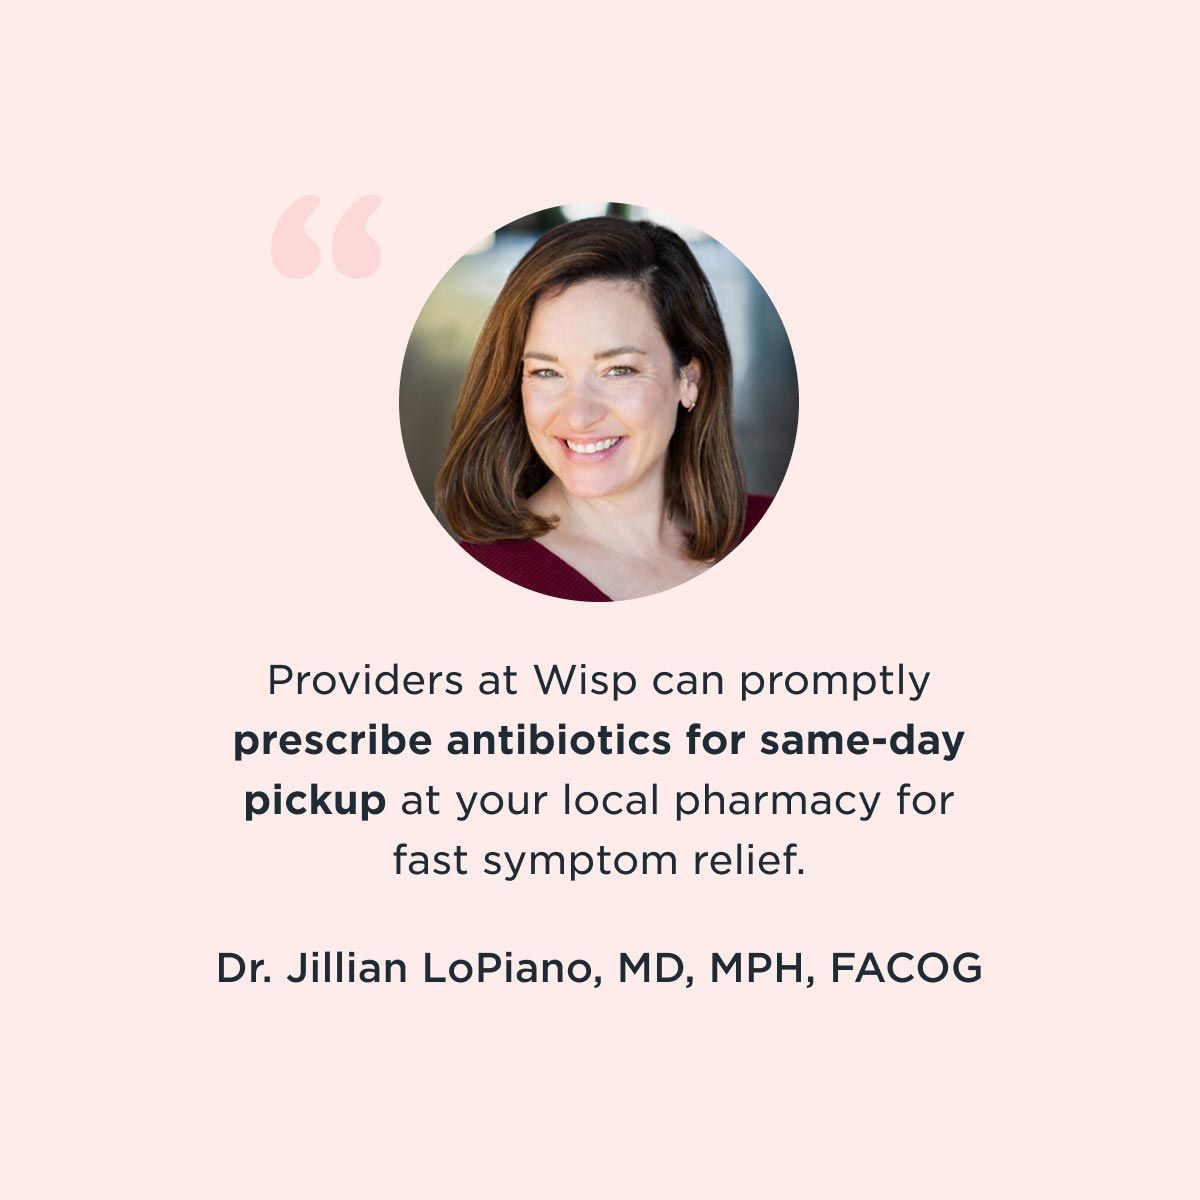 A medial provider quote about UTI treatment from Dr. Jillian Lopiano, MD